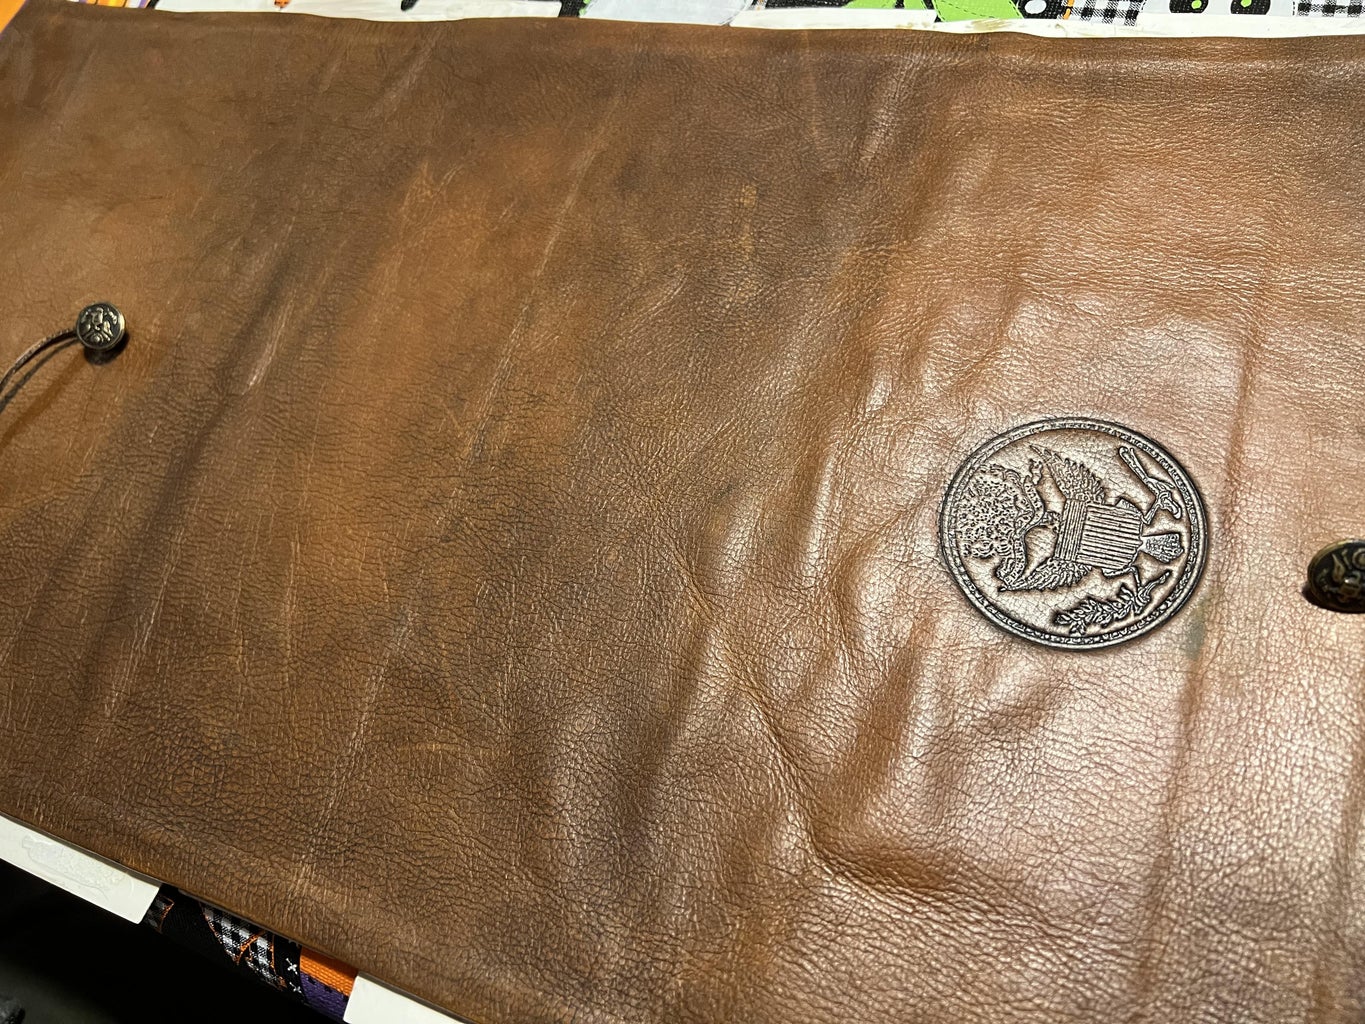 Stamping and Weathering the Leather.